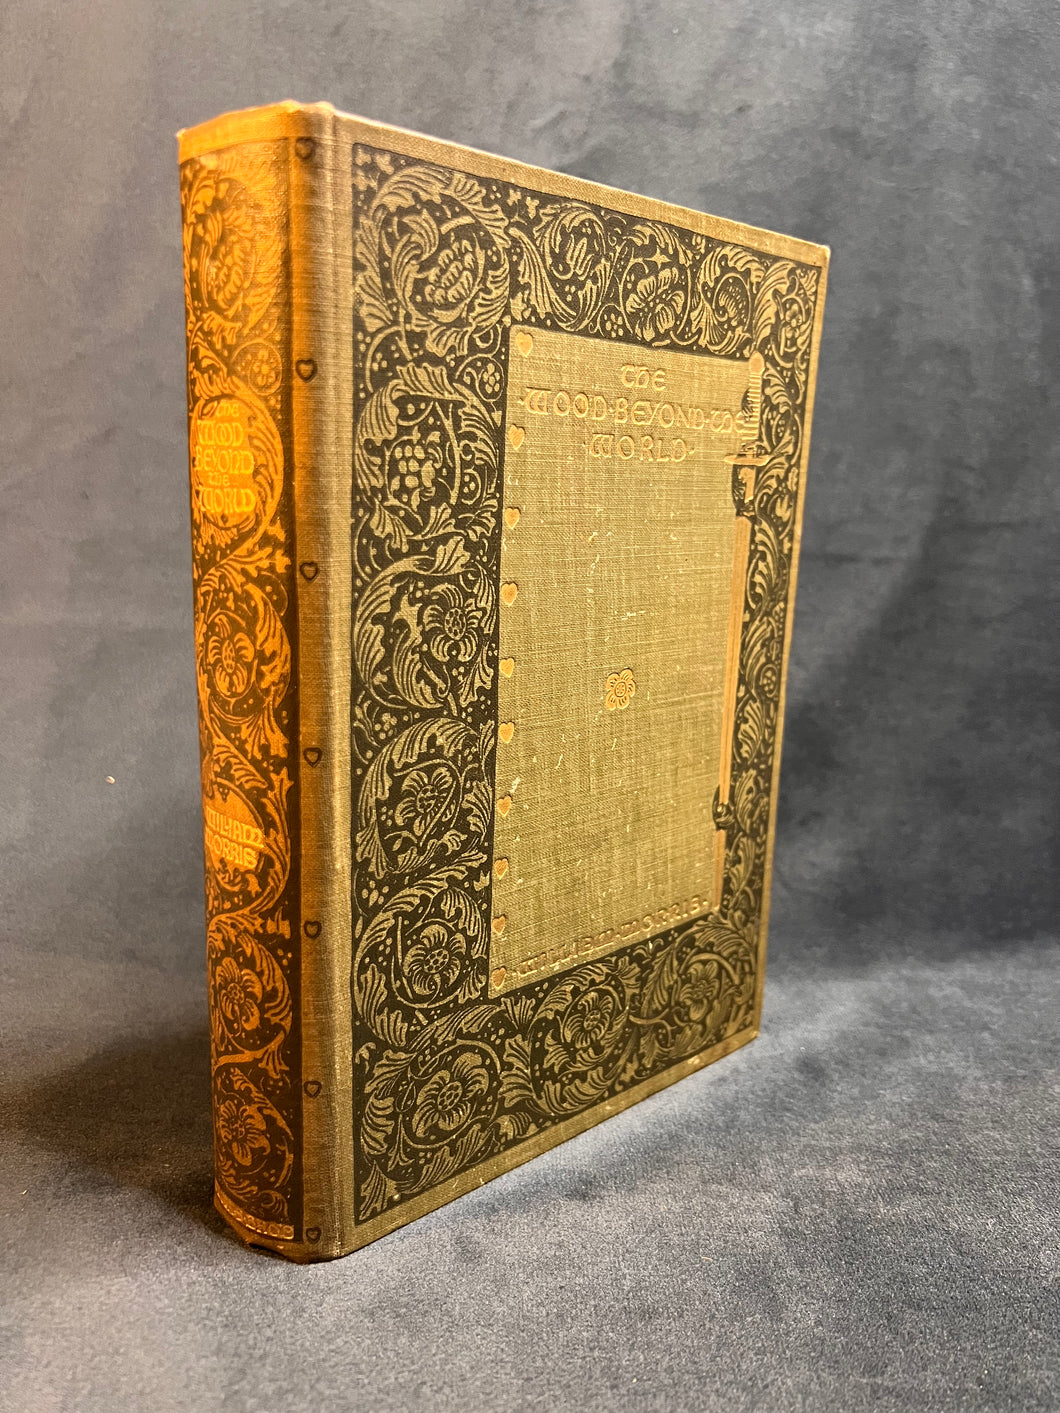 William Morris' Medievalism & Fantasy: William Morris - Wood Beyond the World (First American Edition, 1895)